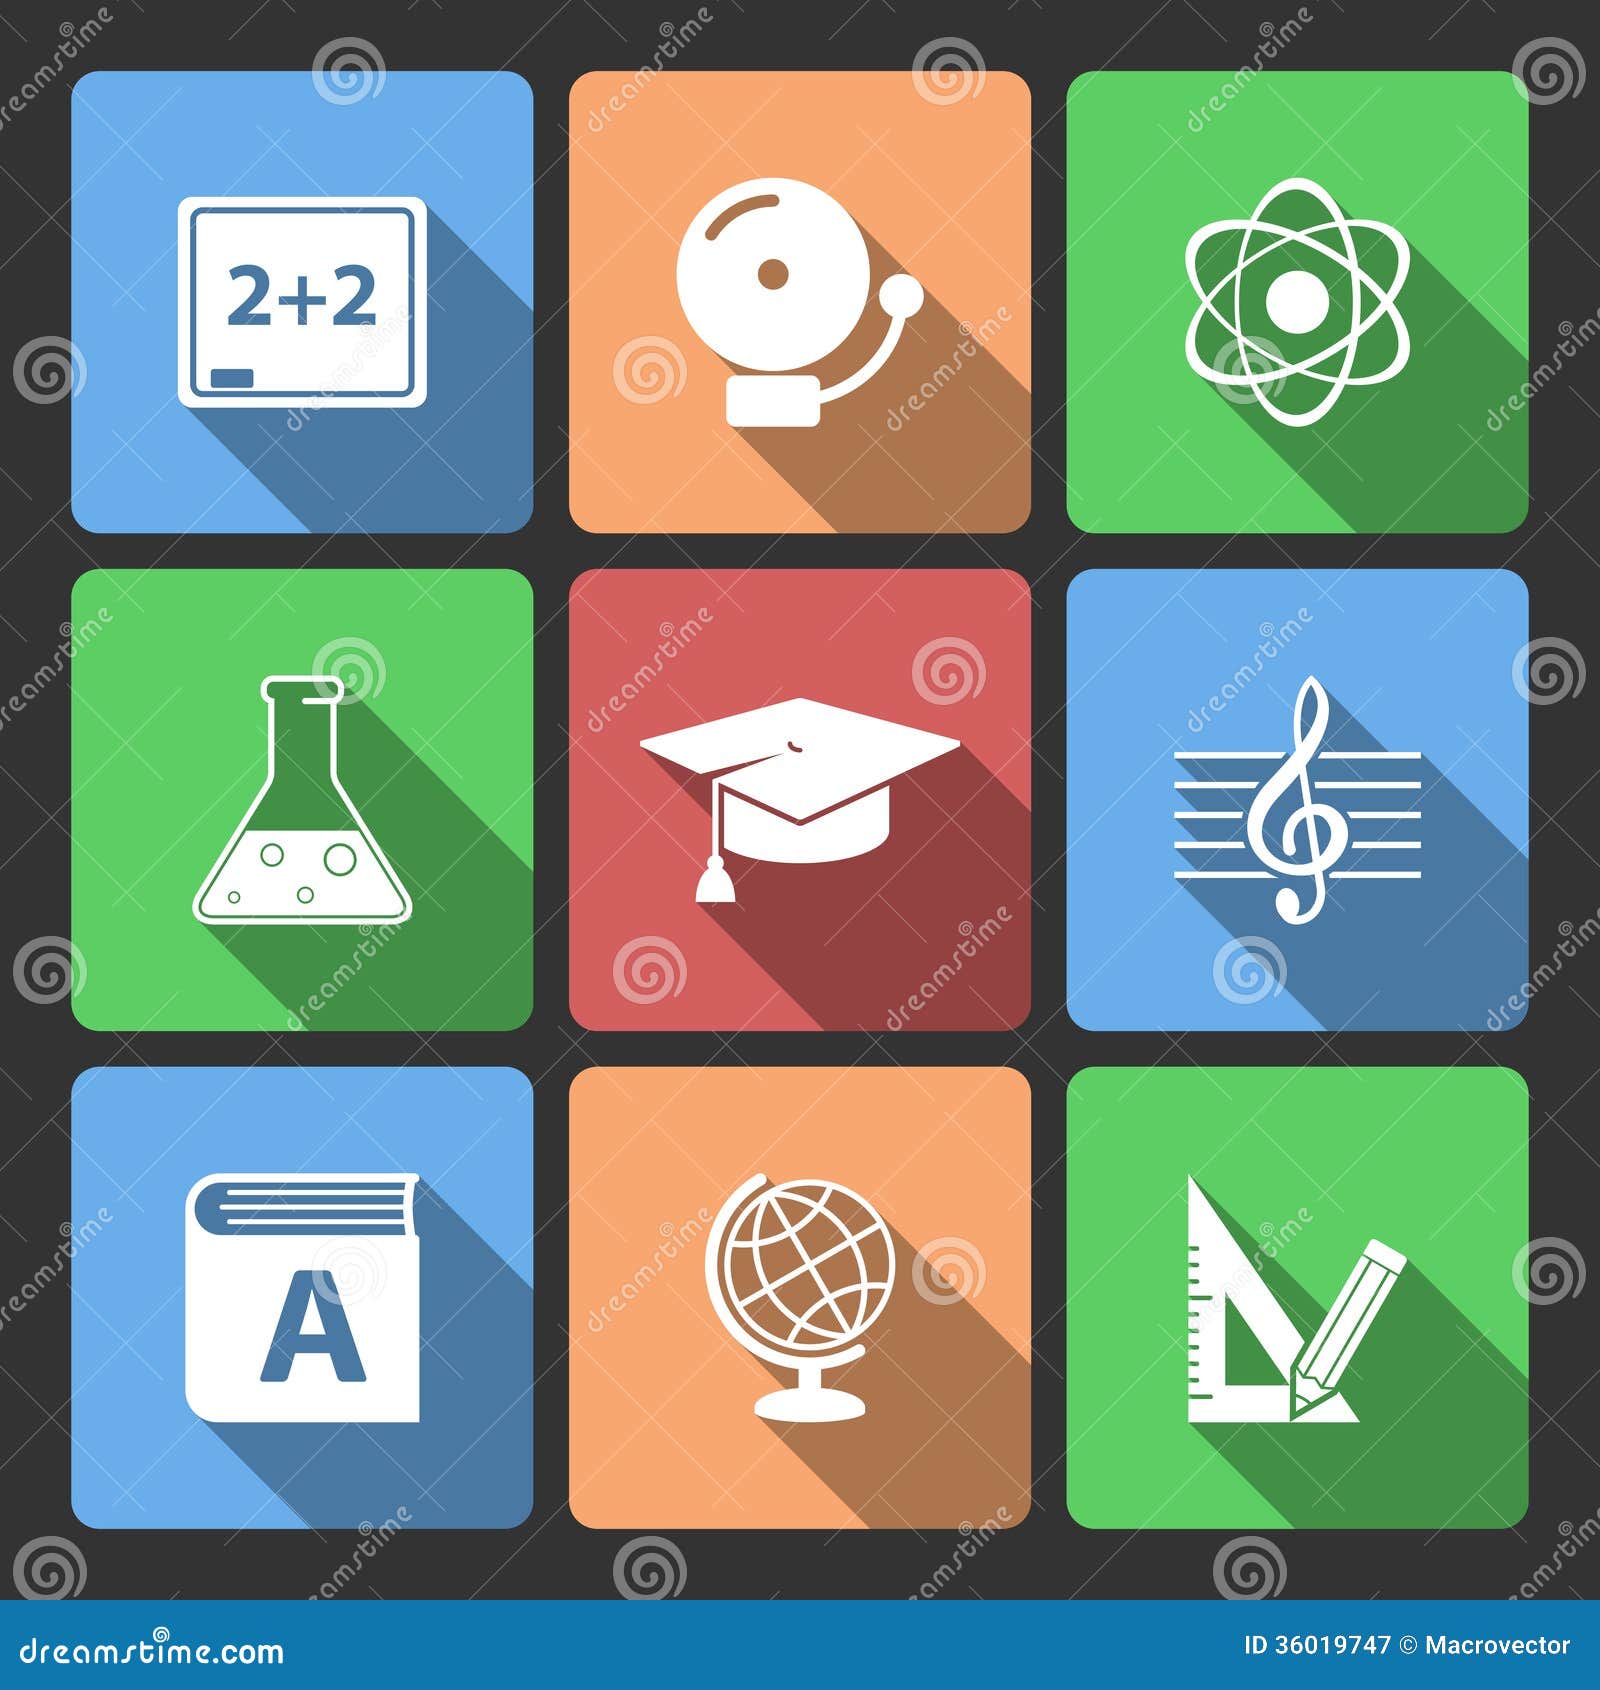 iconset for educational app